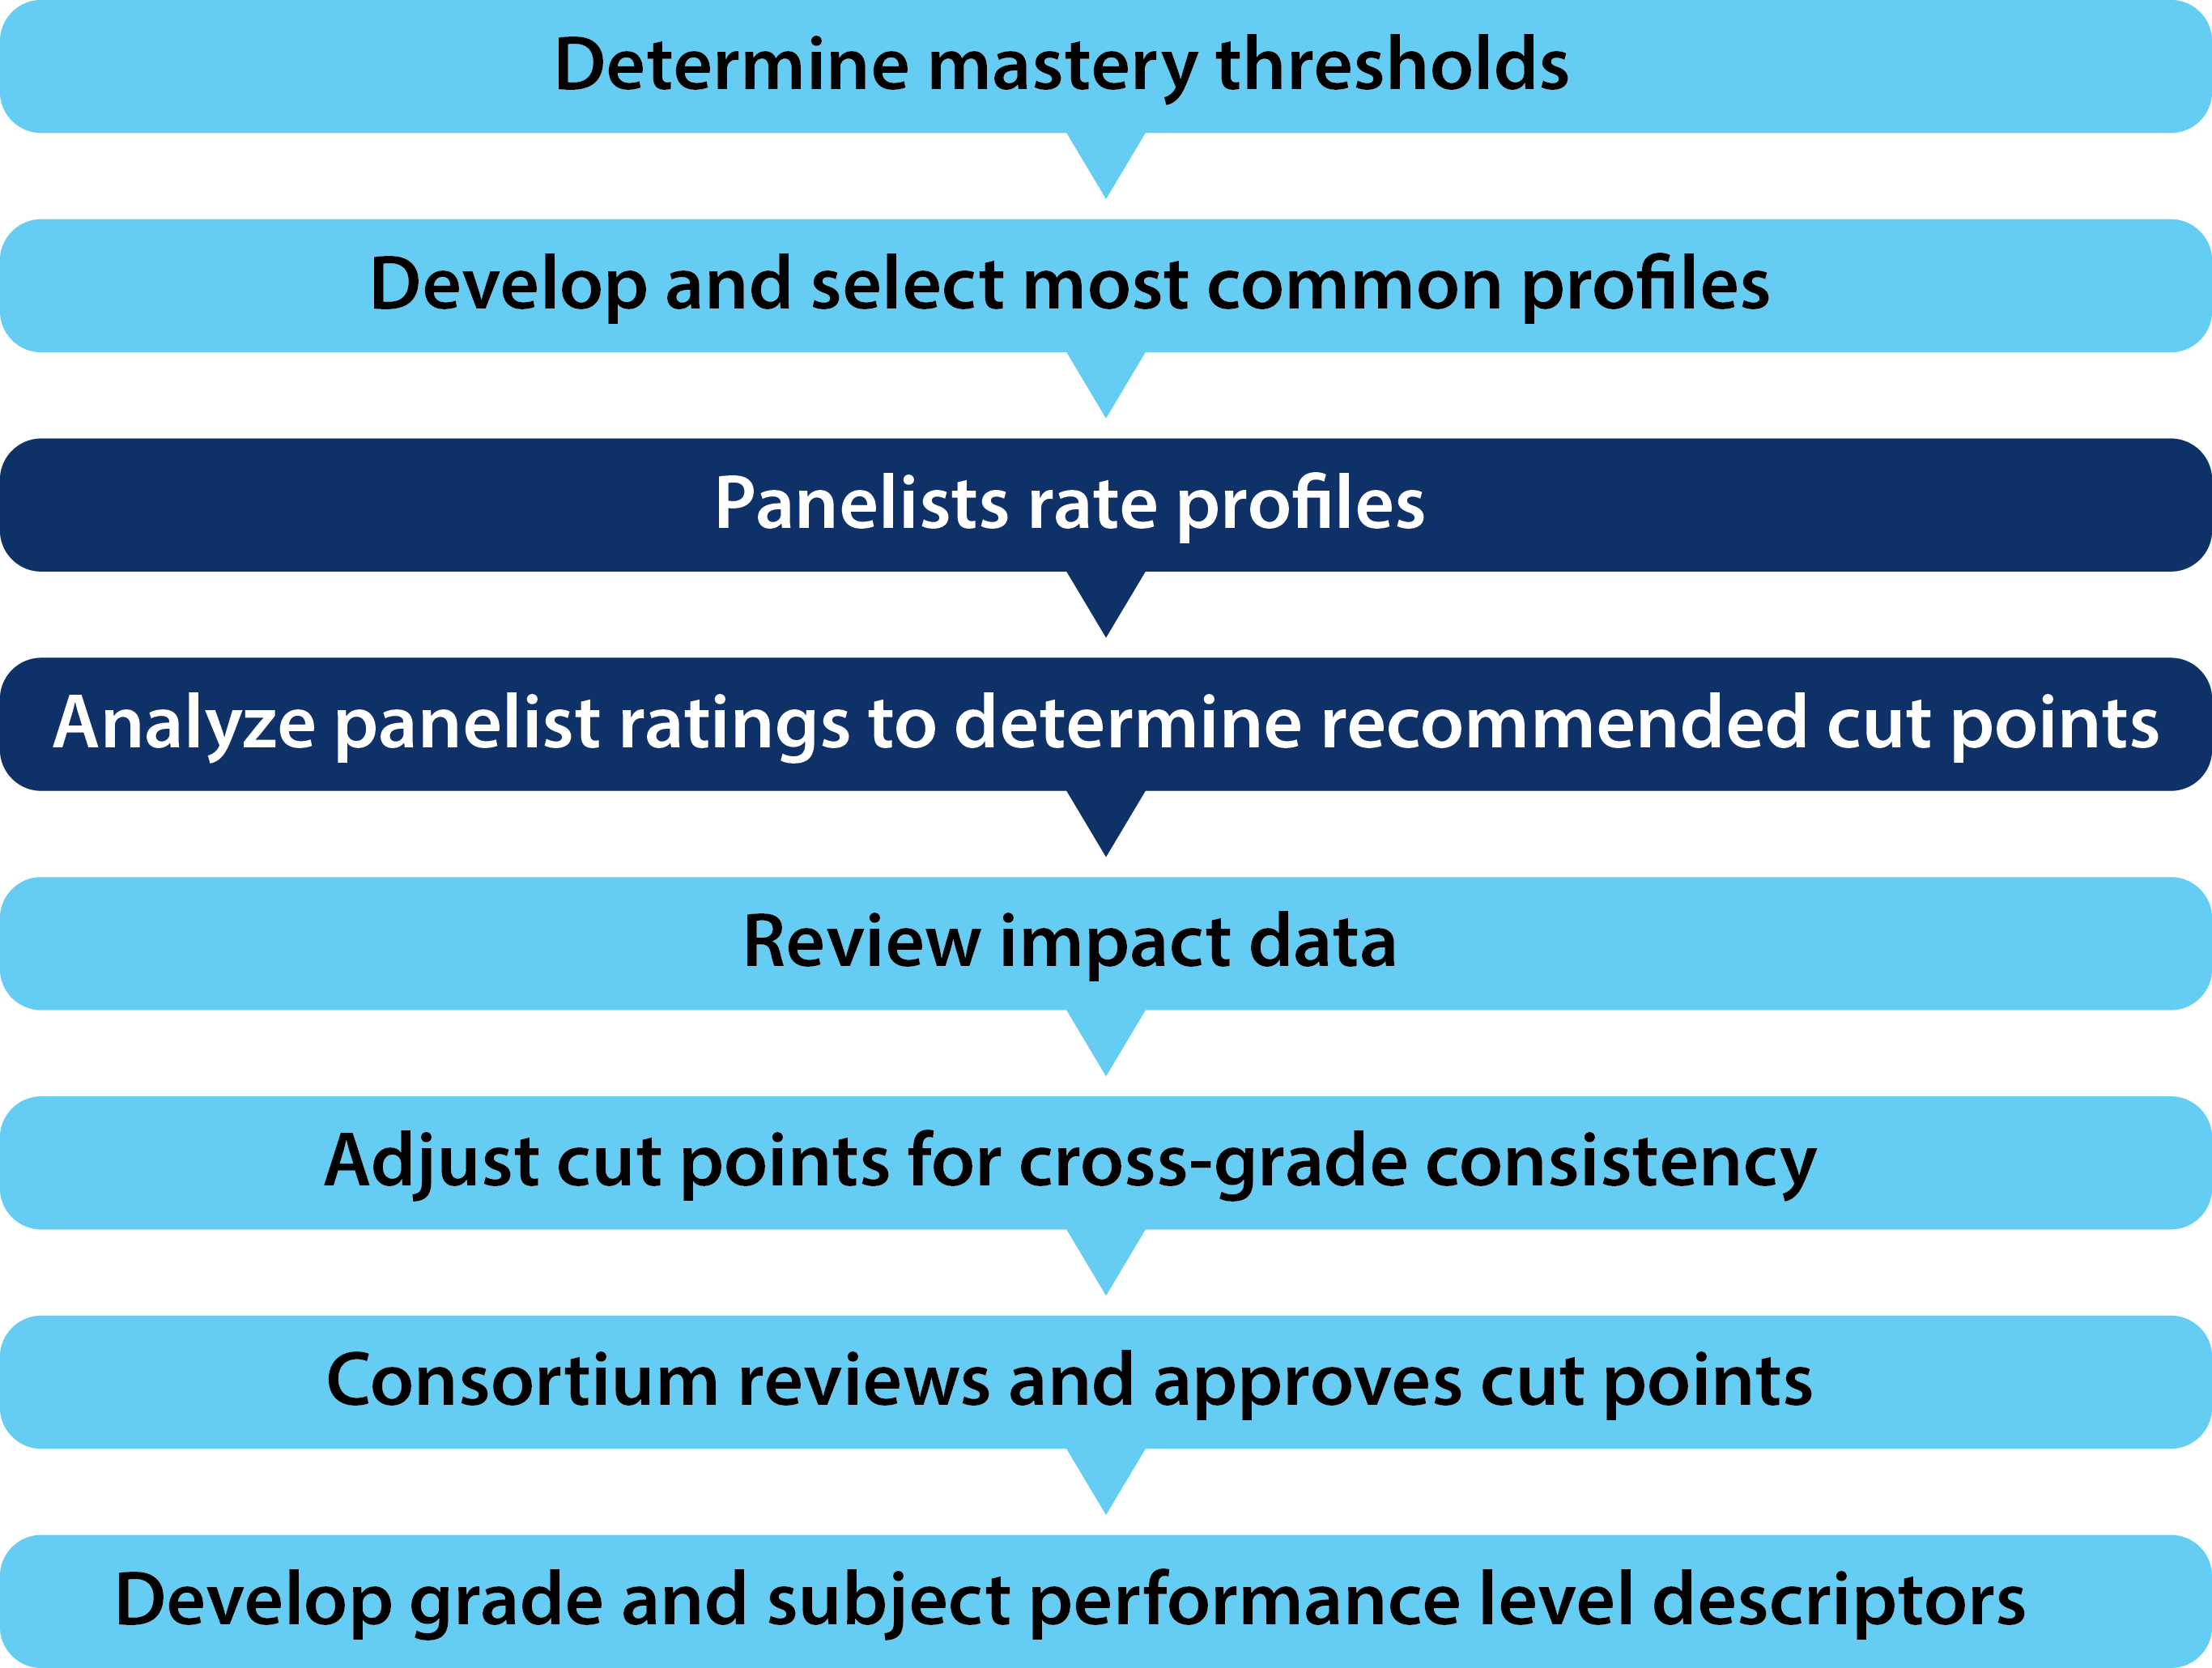 1. Determine mastery thresholds, 2. develop and select most common profiles, 3. (Dark Shading) Panelists rate profiles, 4. (Dark Shading) Analyze panelist ratings to determine recommended cut points, 5. Review impact data, 6. Adjust cut points for cross-grade consistency, 7. Consortium reviews and approves cut points, 8. Develop grade and subject performance level descriptors.